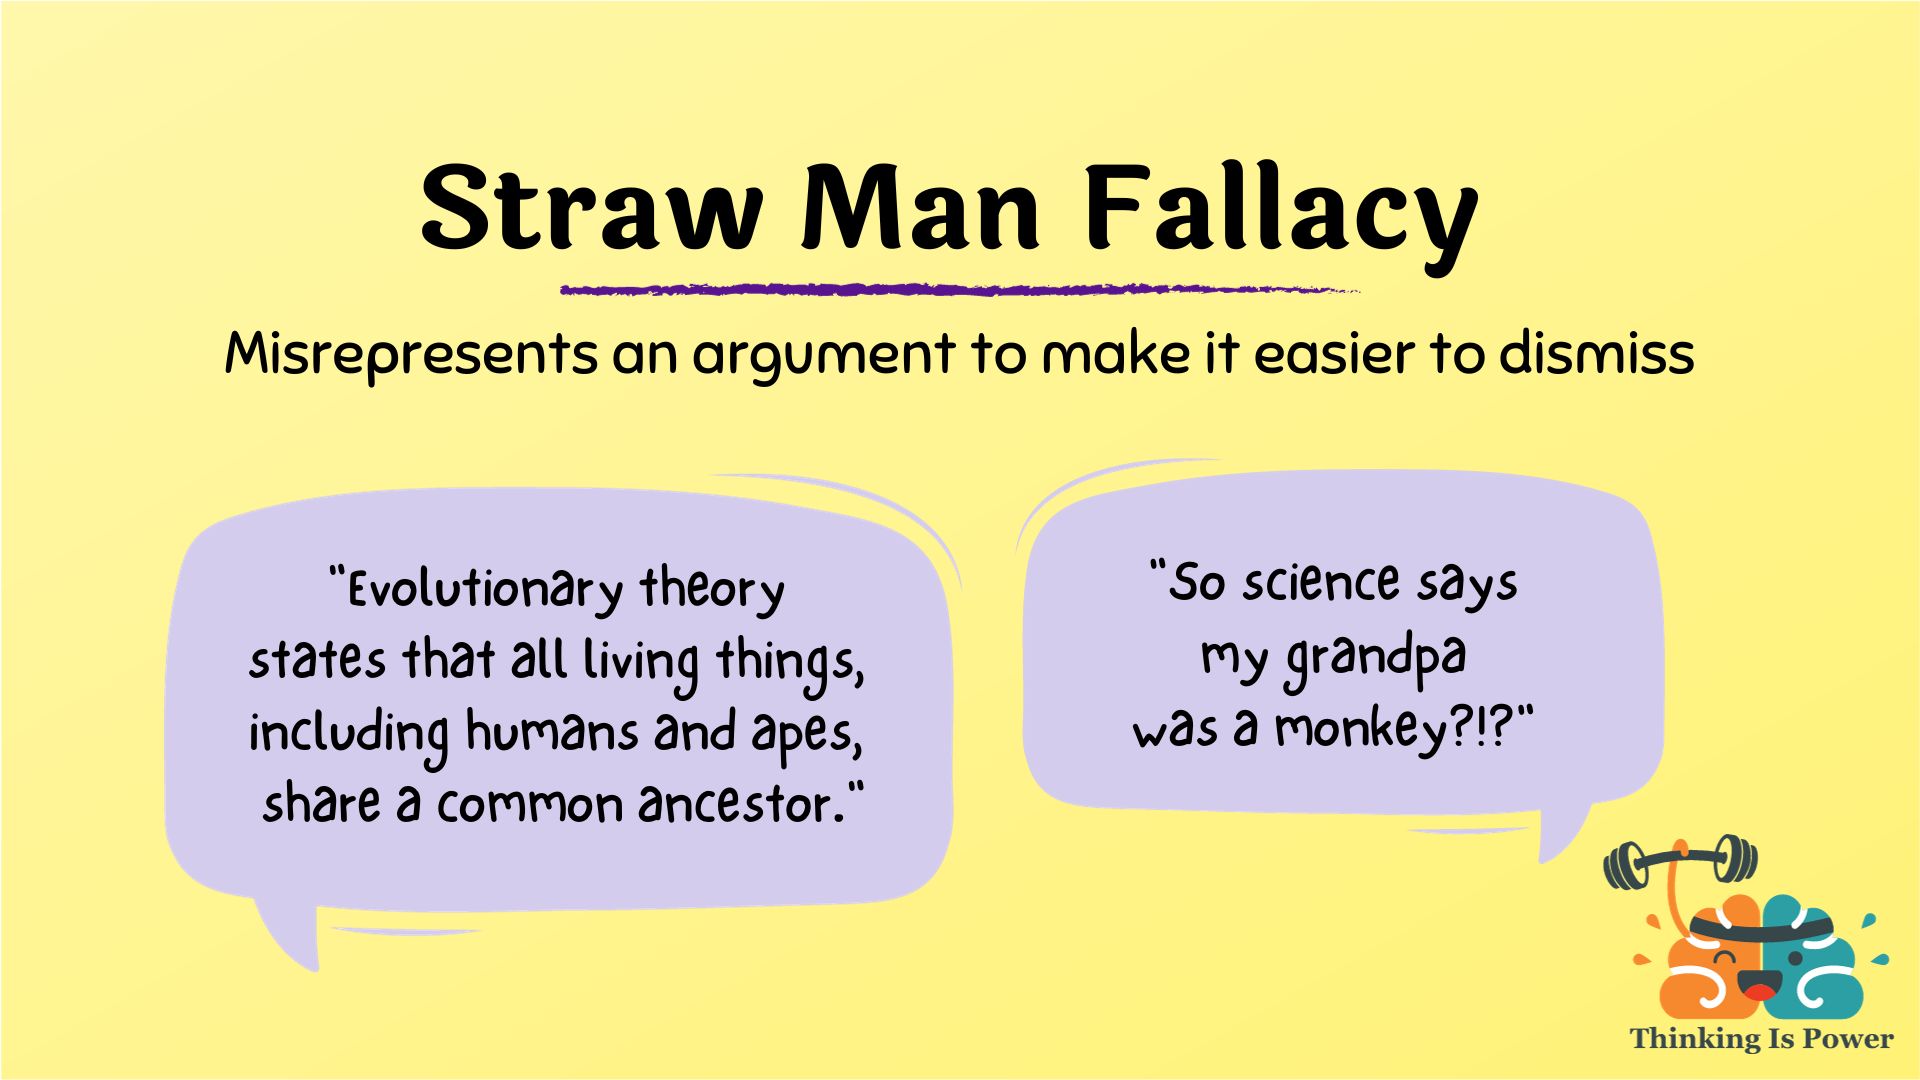 Straw man fallacy mispresents someone's argument to make it easier to dismiss; example is someone who says evolutionary theory states all living things have a common ancestor and the other says so you're saying my grandpa was a monkey?